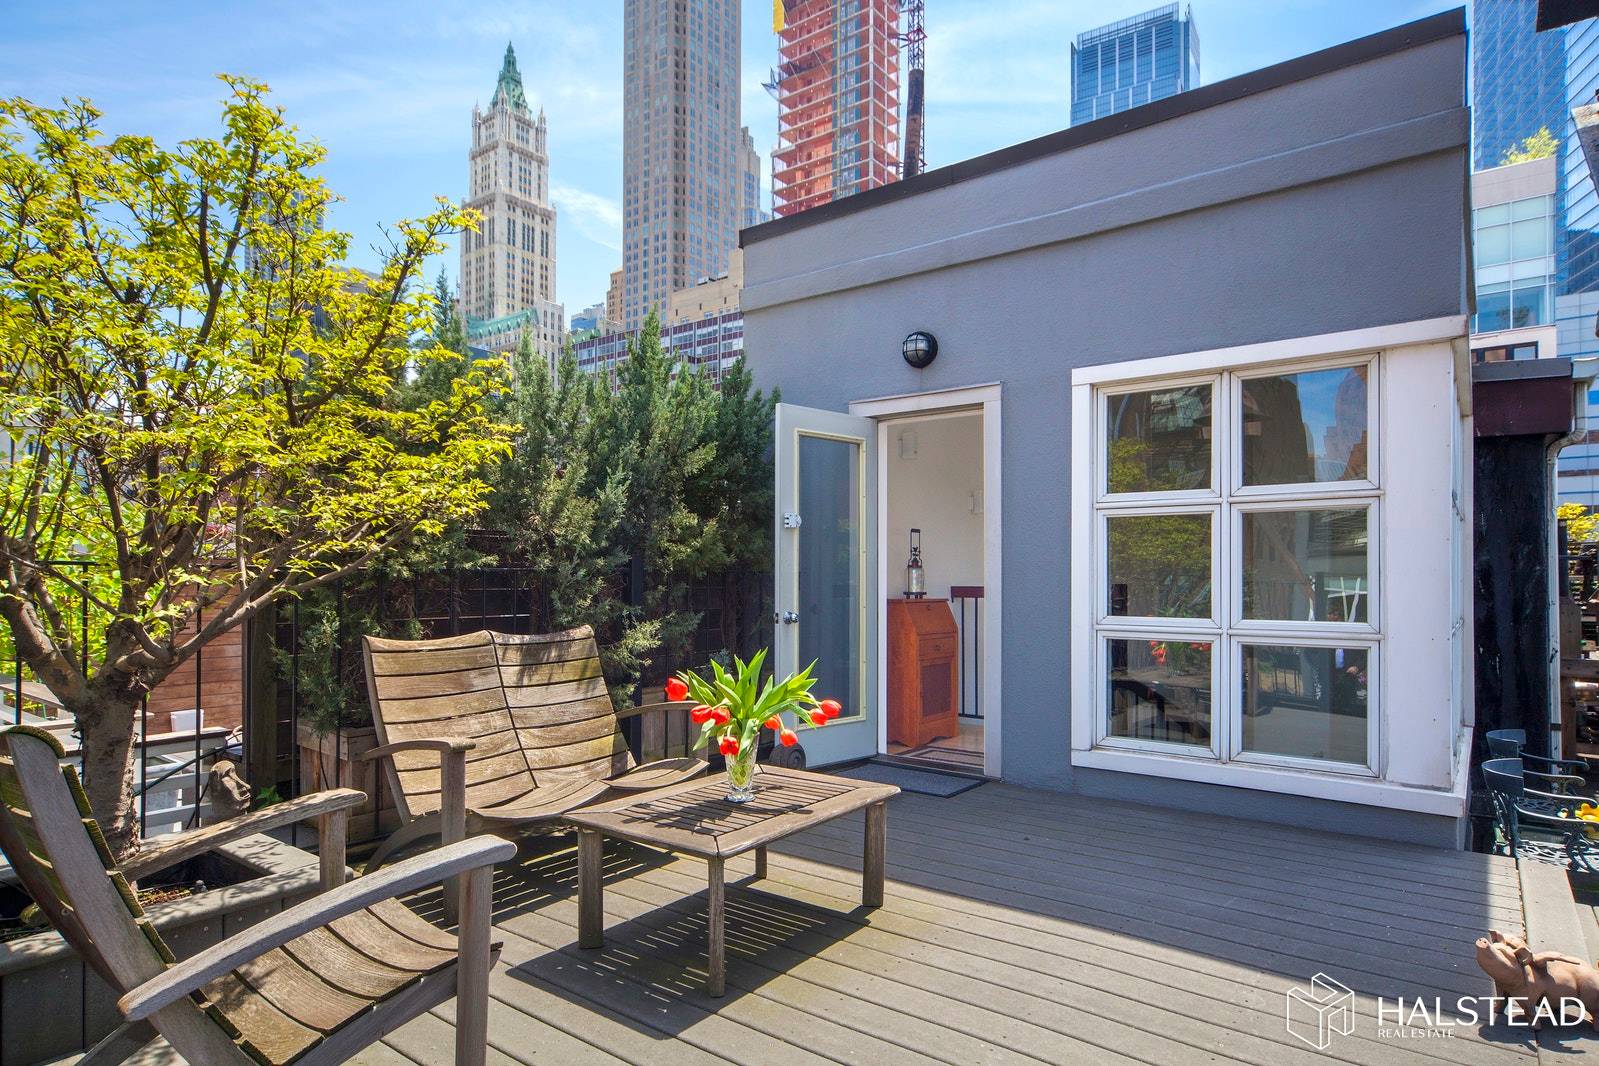 OWNER WANTS THIS TO BE THE NEXT HOME SOLD IN TRIBECA PRICE REDUCED to sell fast.